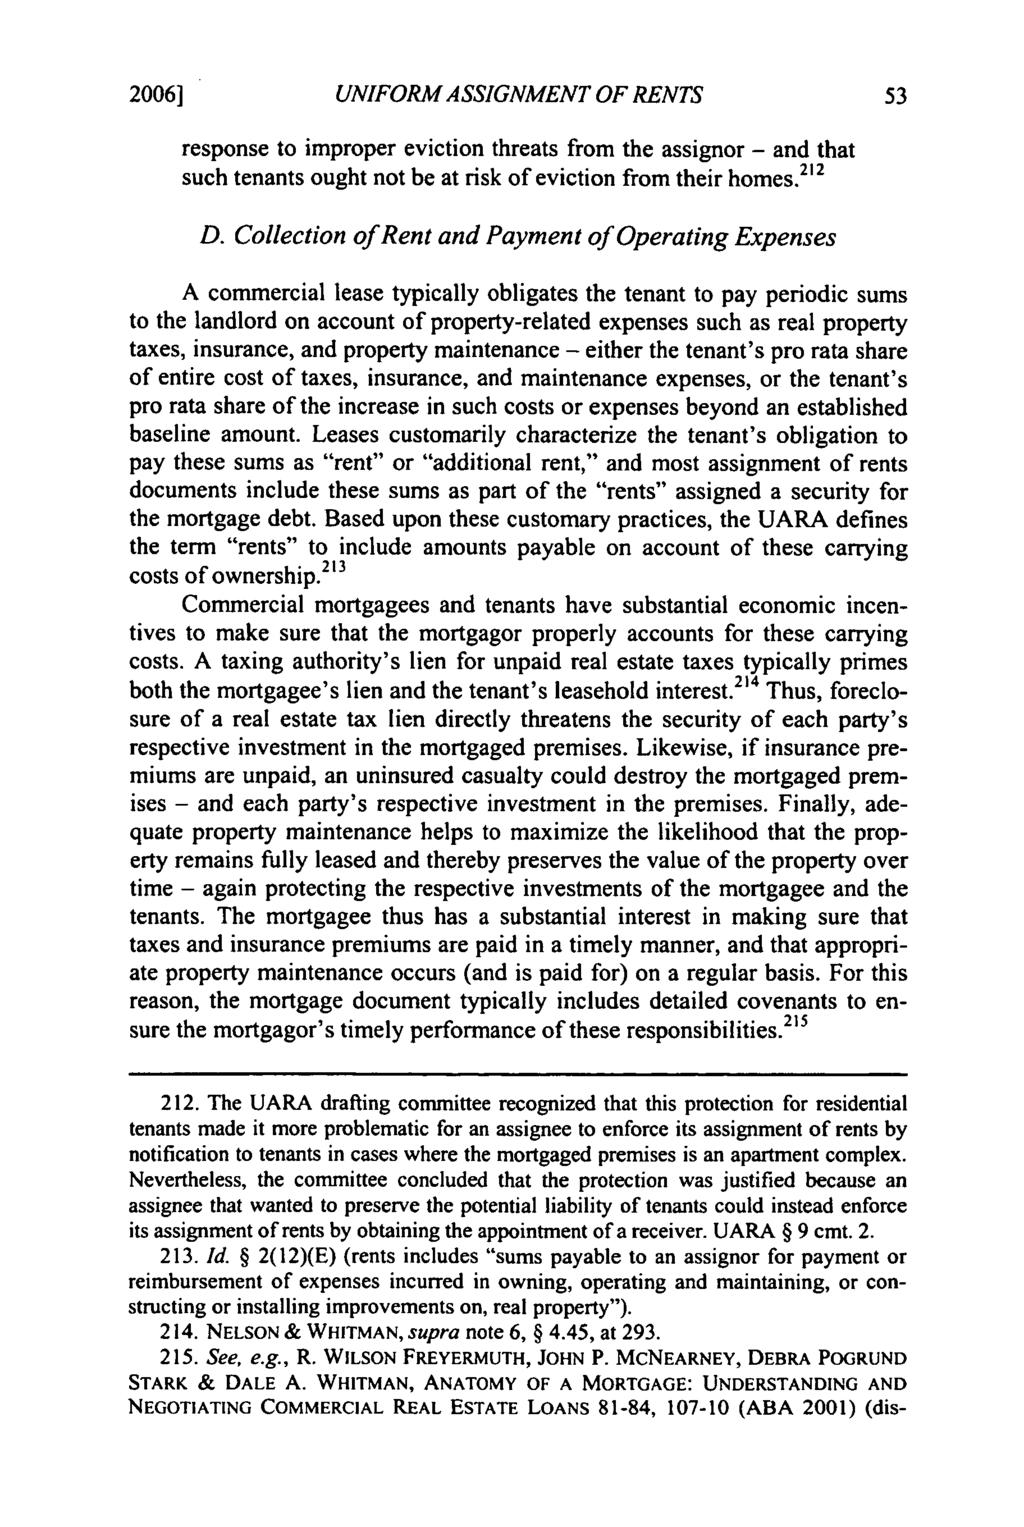 2006] Freyermuth: Freyermuth: Modernizing Security in Rents UNIFORM ASSIGNMENT OF RENTS response to improper eviction threats from the assignor - and that such tenants ought not be at risk of